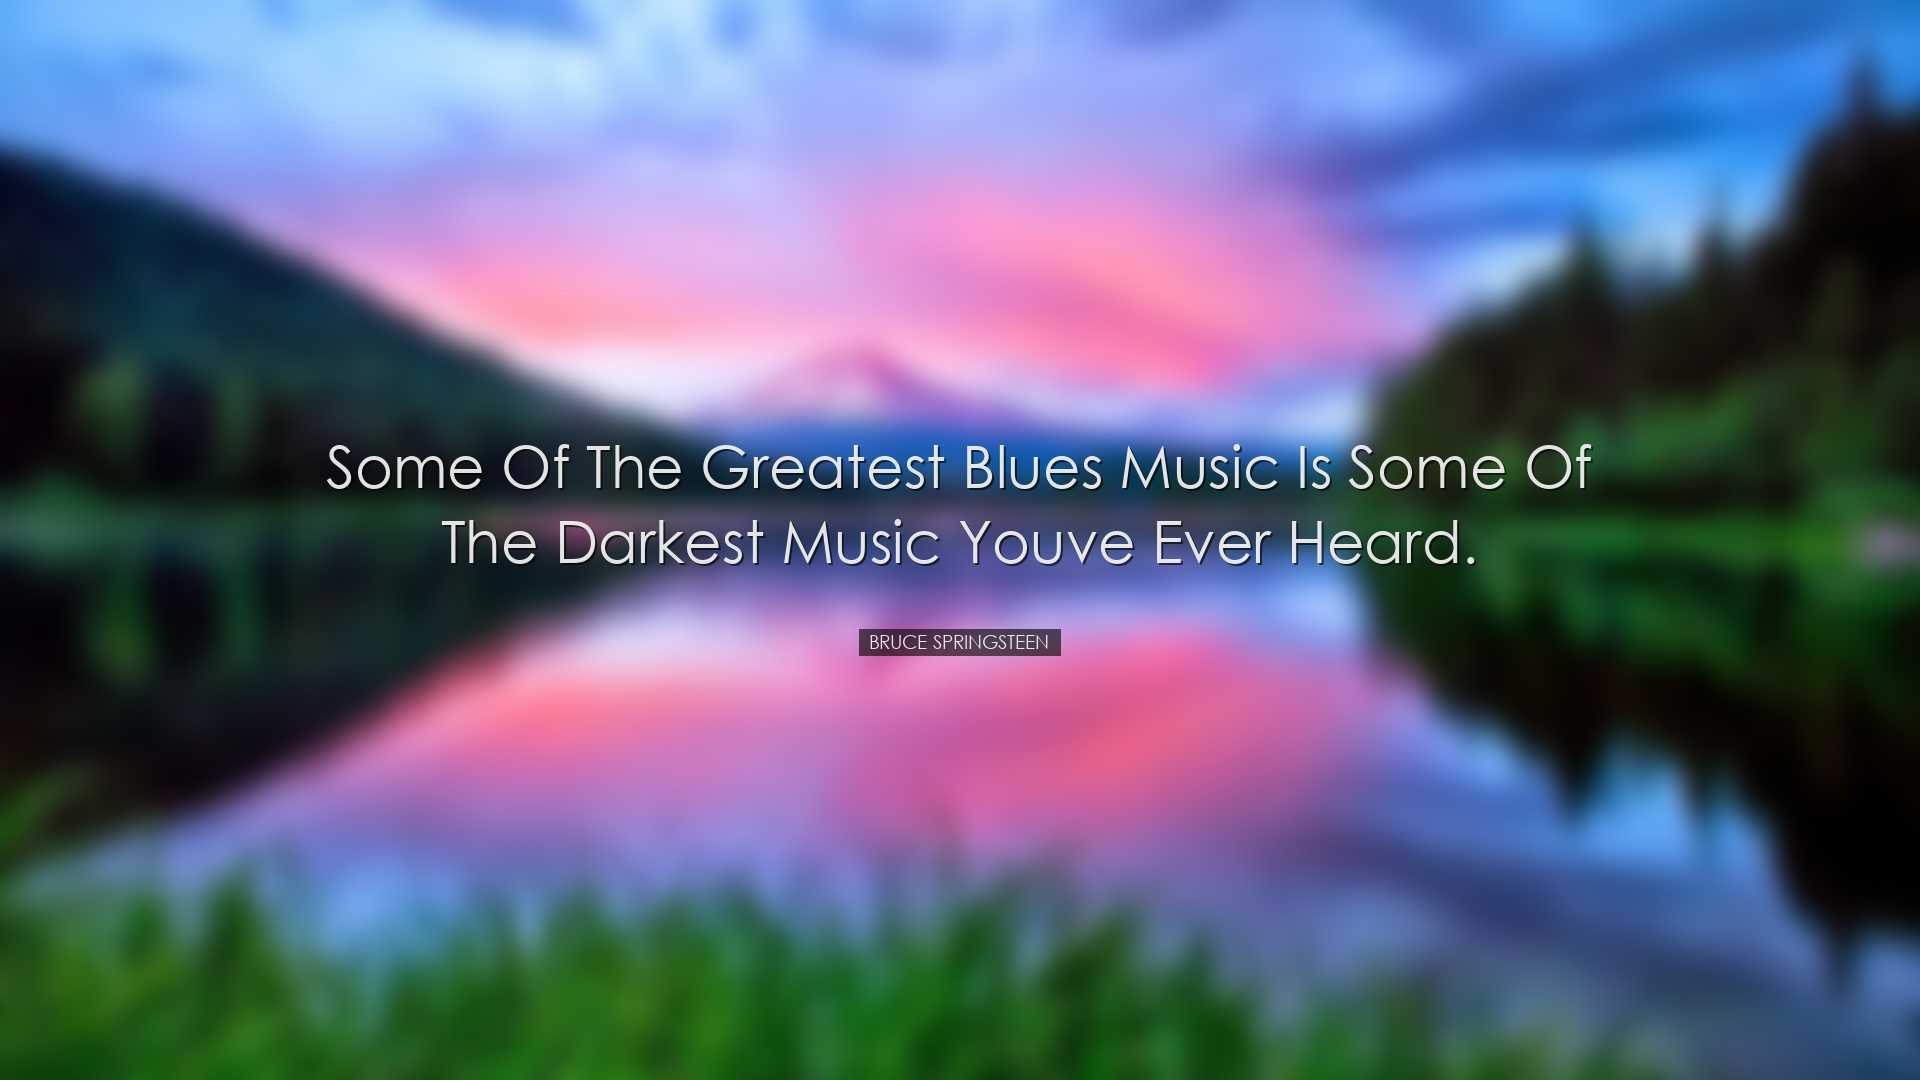 Some of the greatest blues music is some of the darkest music youv